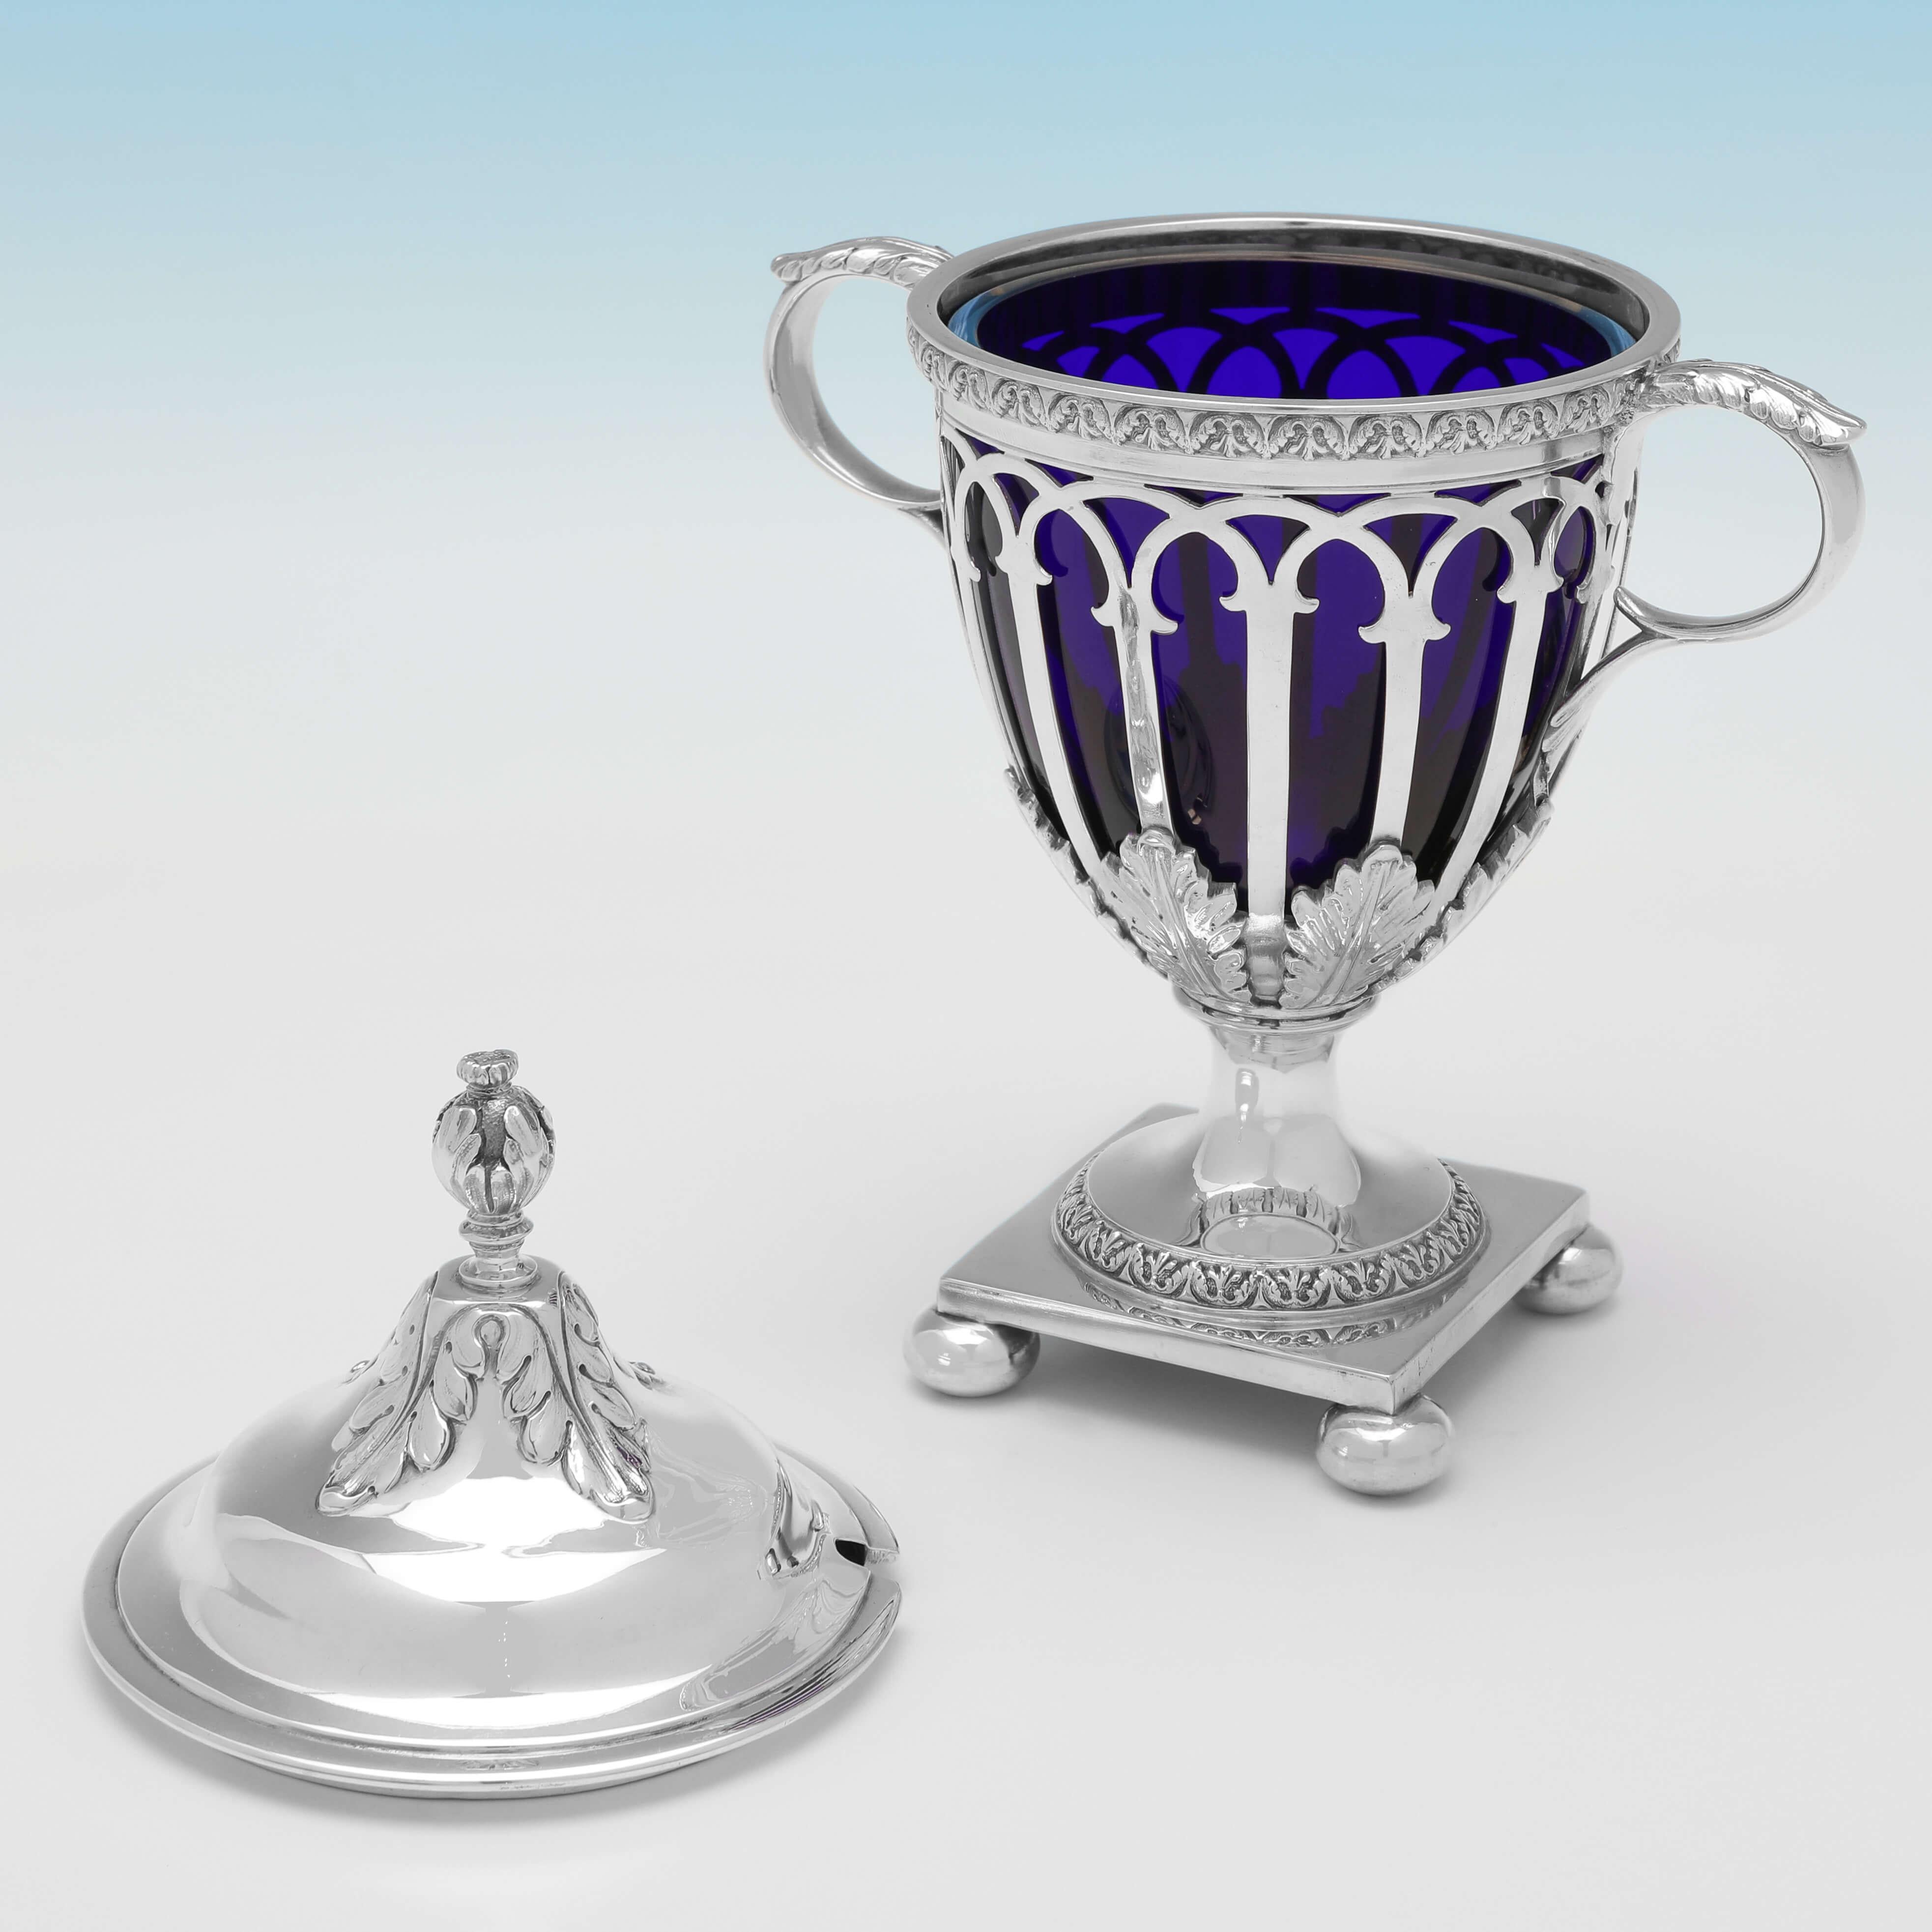 Hallmarked in London in 1912 by George Howson, this attractive, antique sterling silver sugar basket, is in the Neoclassical revival taste, and features a blue glass liner and removable lid. 

The sugar basket would also work well to serve other